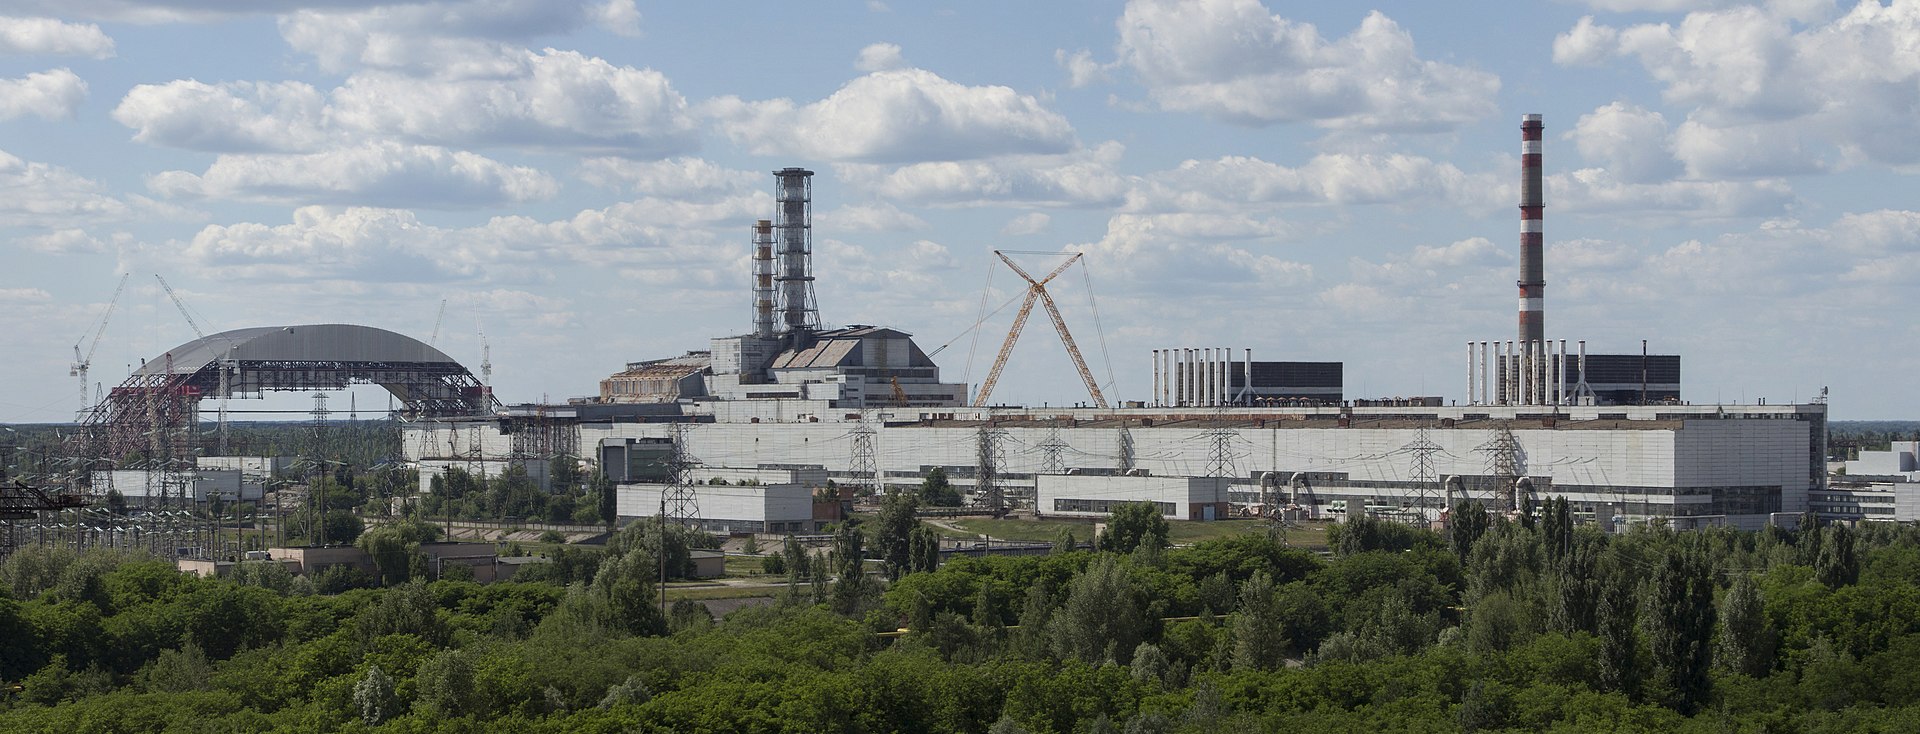 chernobyl_npp_site_panorama_with_nsc_construction_june_2013.jpg